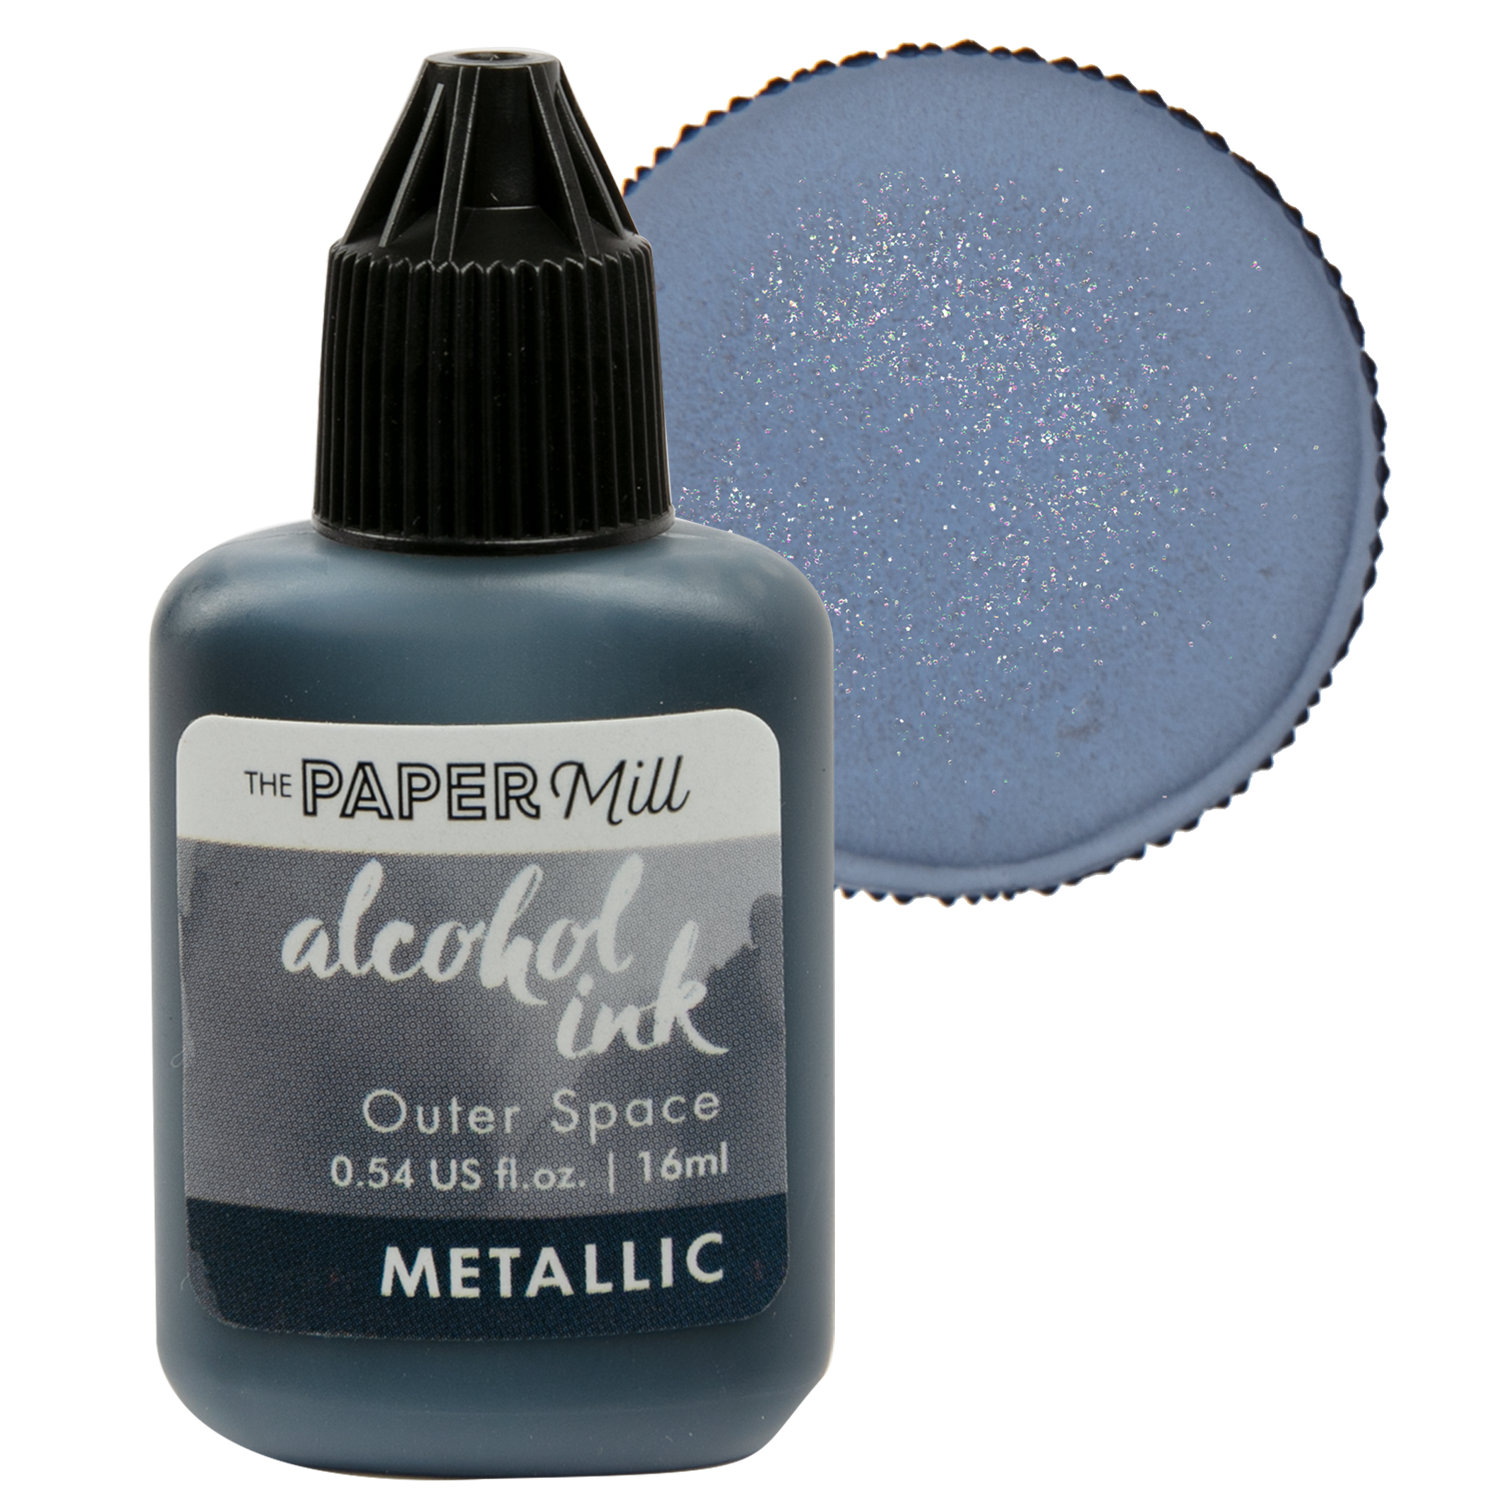 Stay Fit and Active: The Paper Mill Metallic Alcohol Ink Outer Space 16ml  737